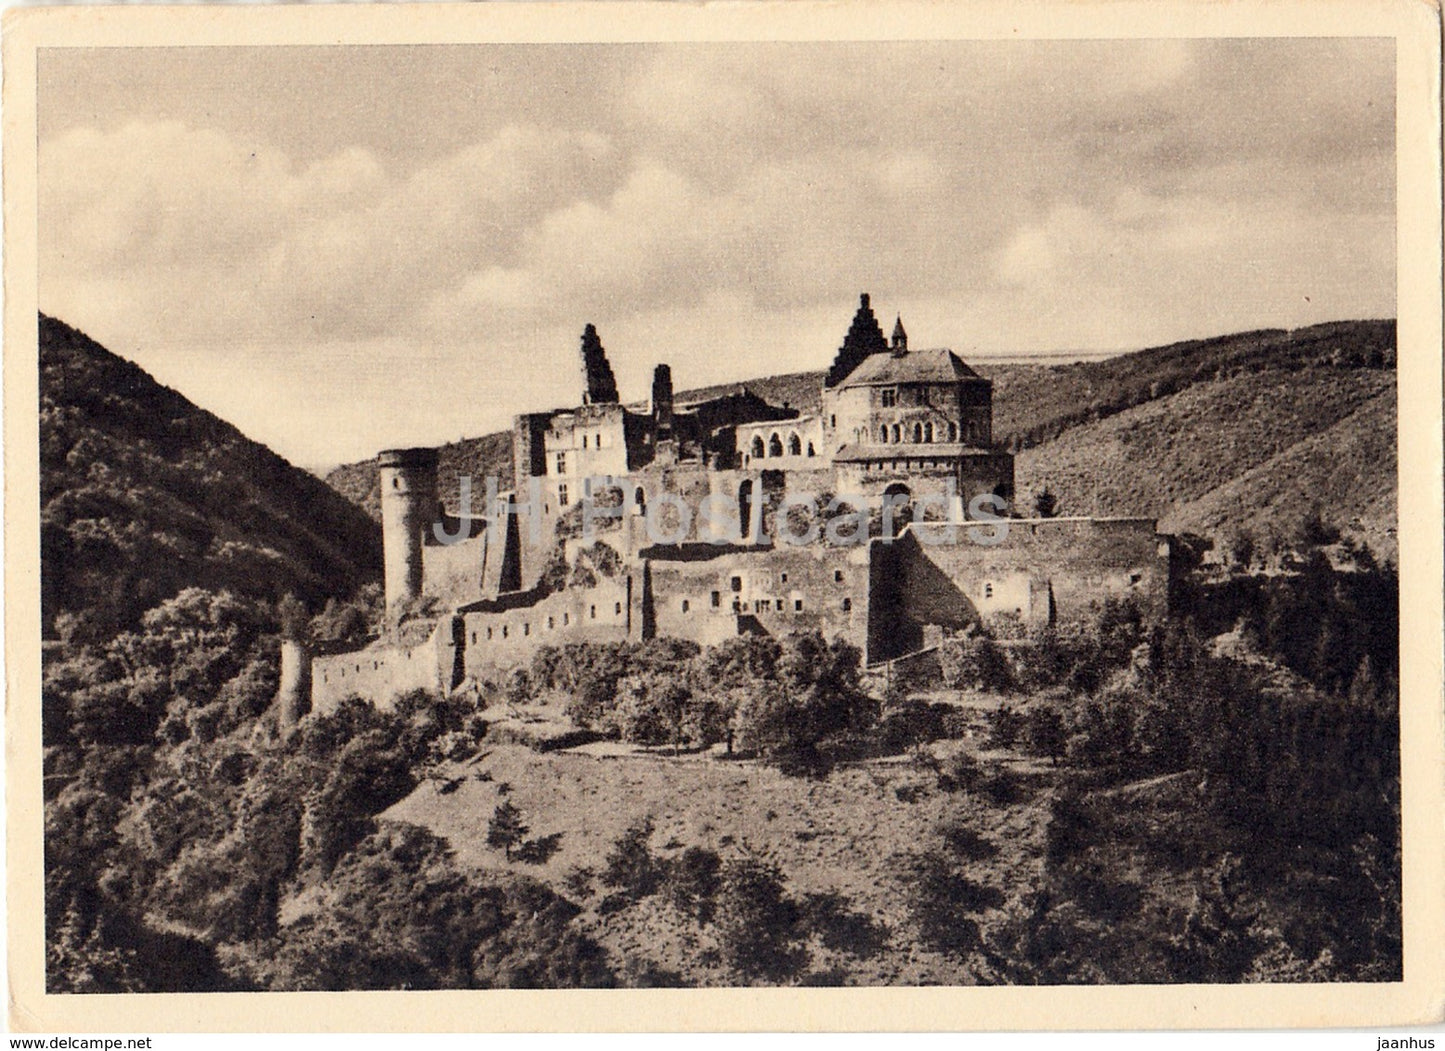 Burg Vianden in Luxemburg - castle - Luxembourg - used - JH Postcards